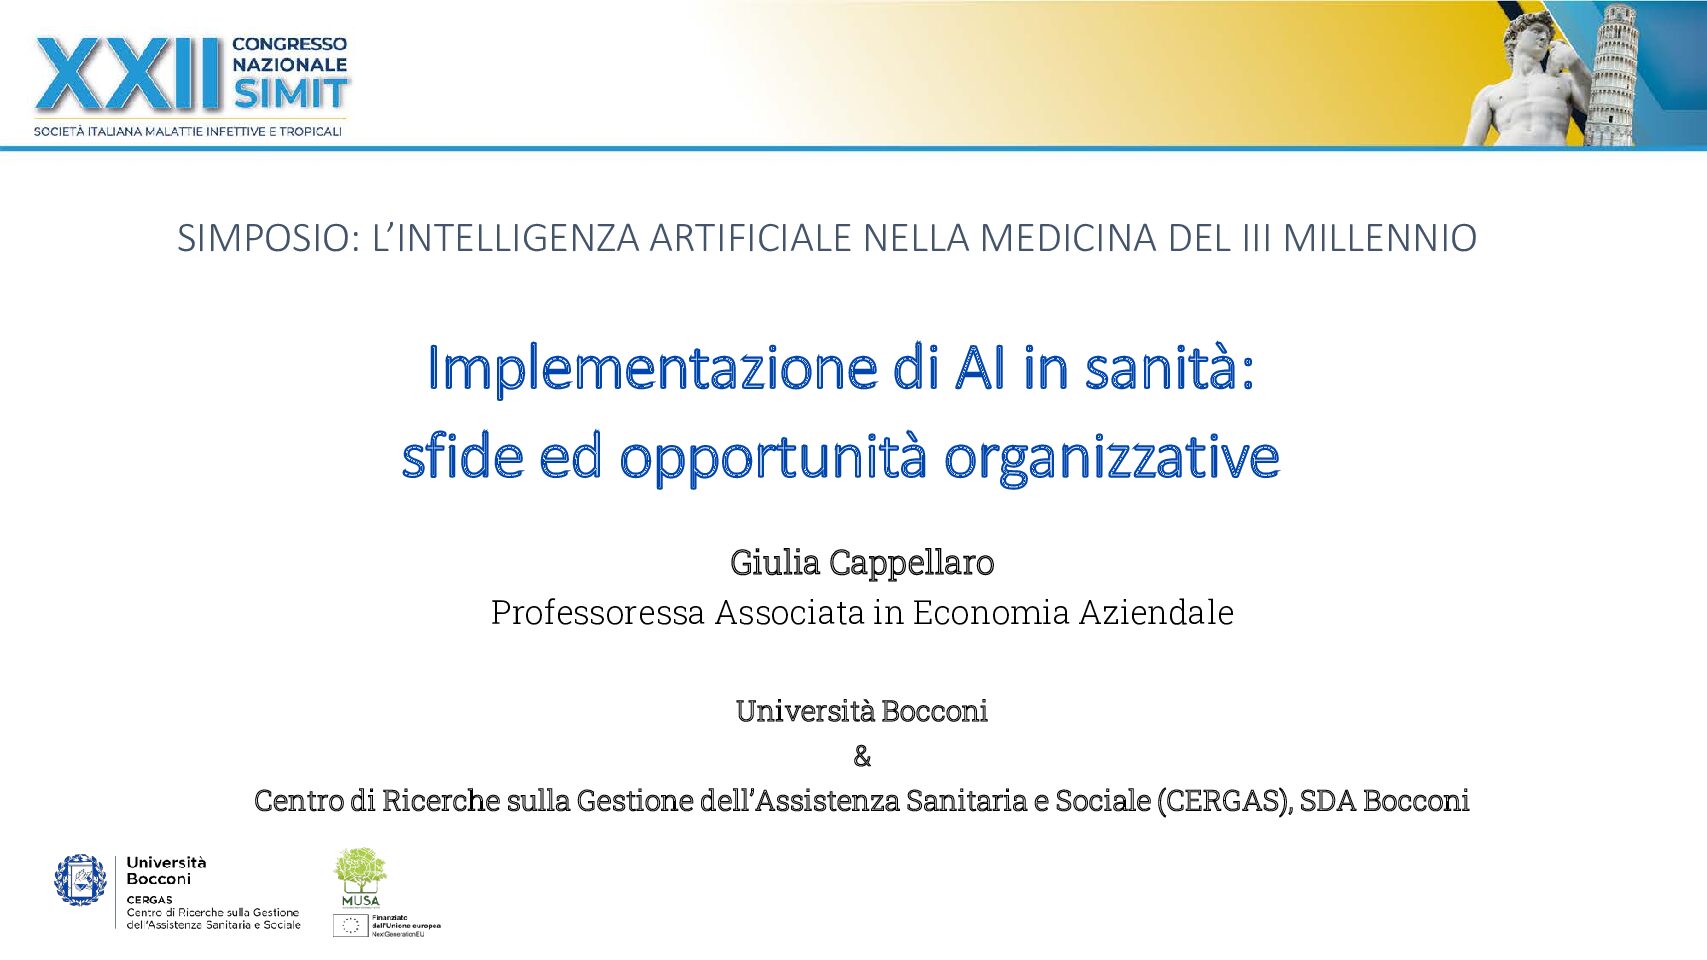 Symposium on AI at the XXII National Congress of the Italian Society of Infectious and Tropical Diseases